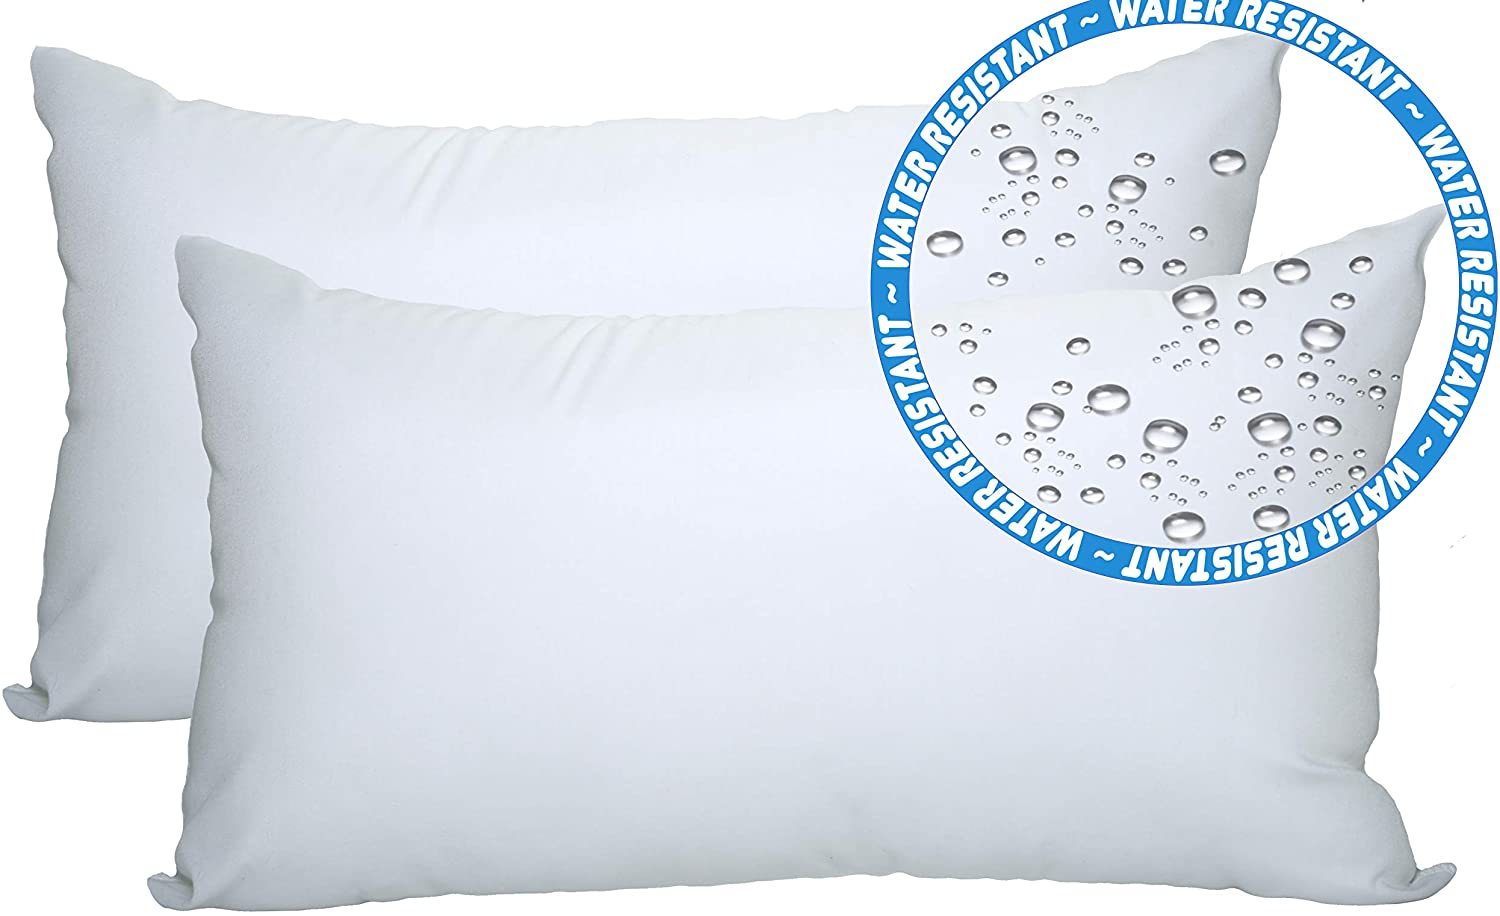 Fixwal 18x18 Inches Outdoor Pillow Inserts Set of 2, Waterproof